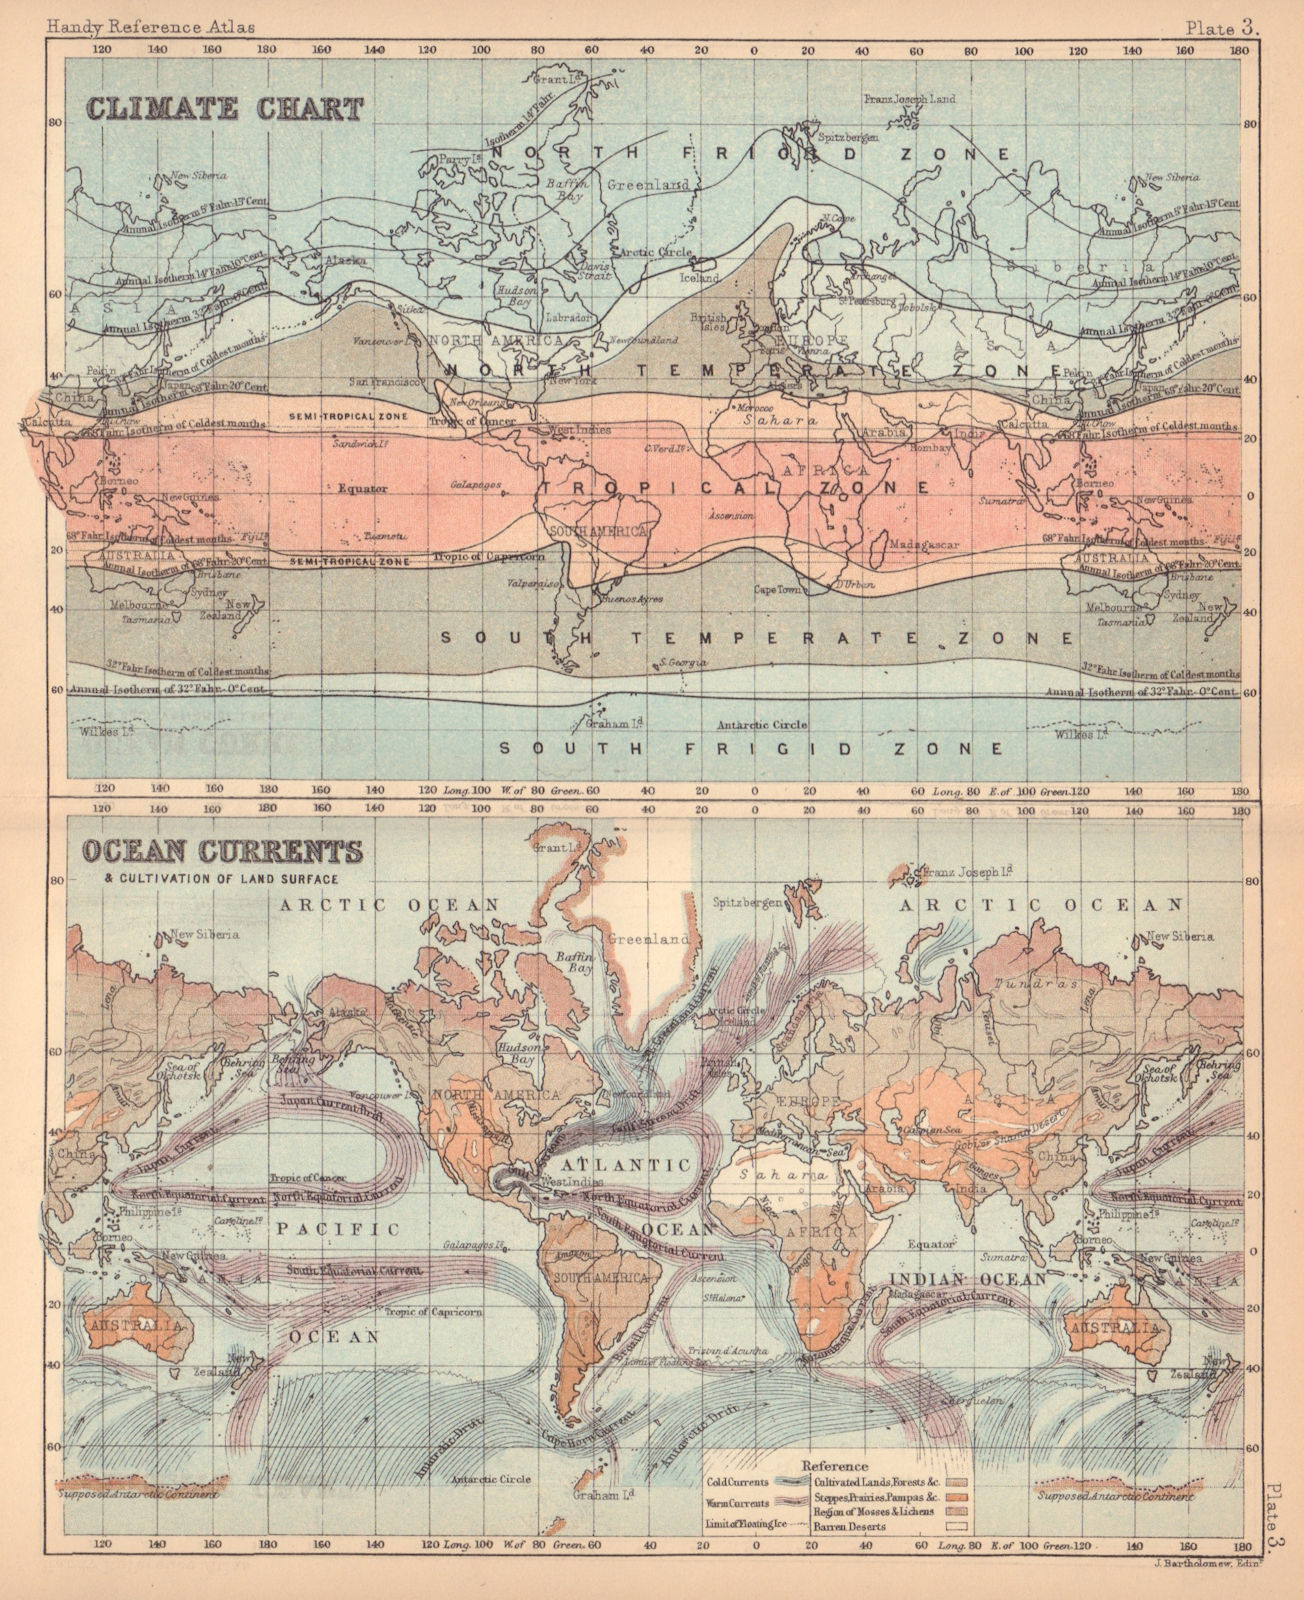 Associate Product Climate Chart, Ocean Currents & Land cultivation. World. BARTHOLOMEW 1888 map